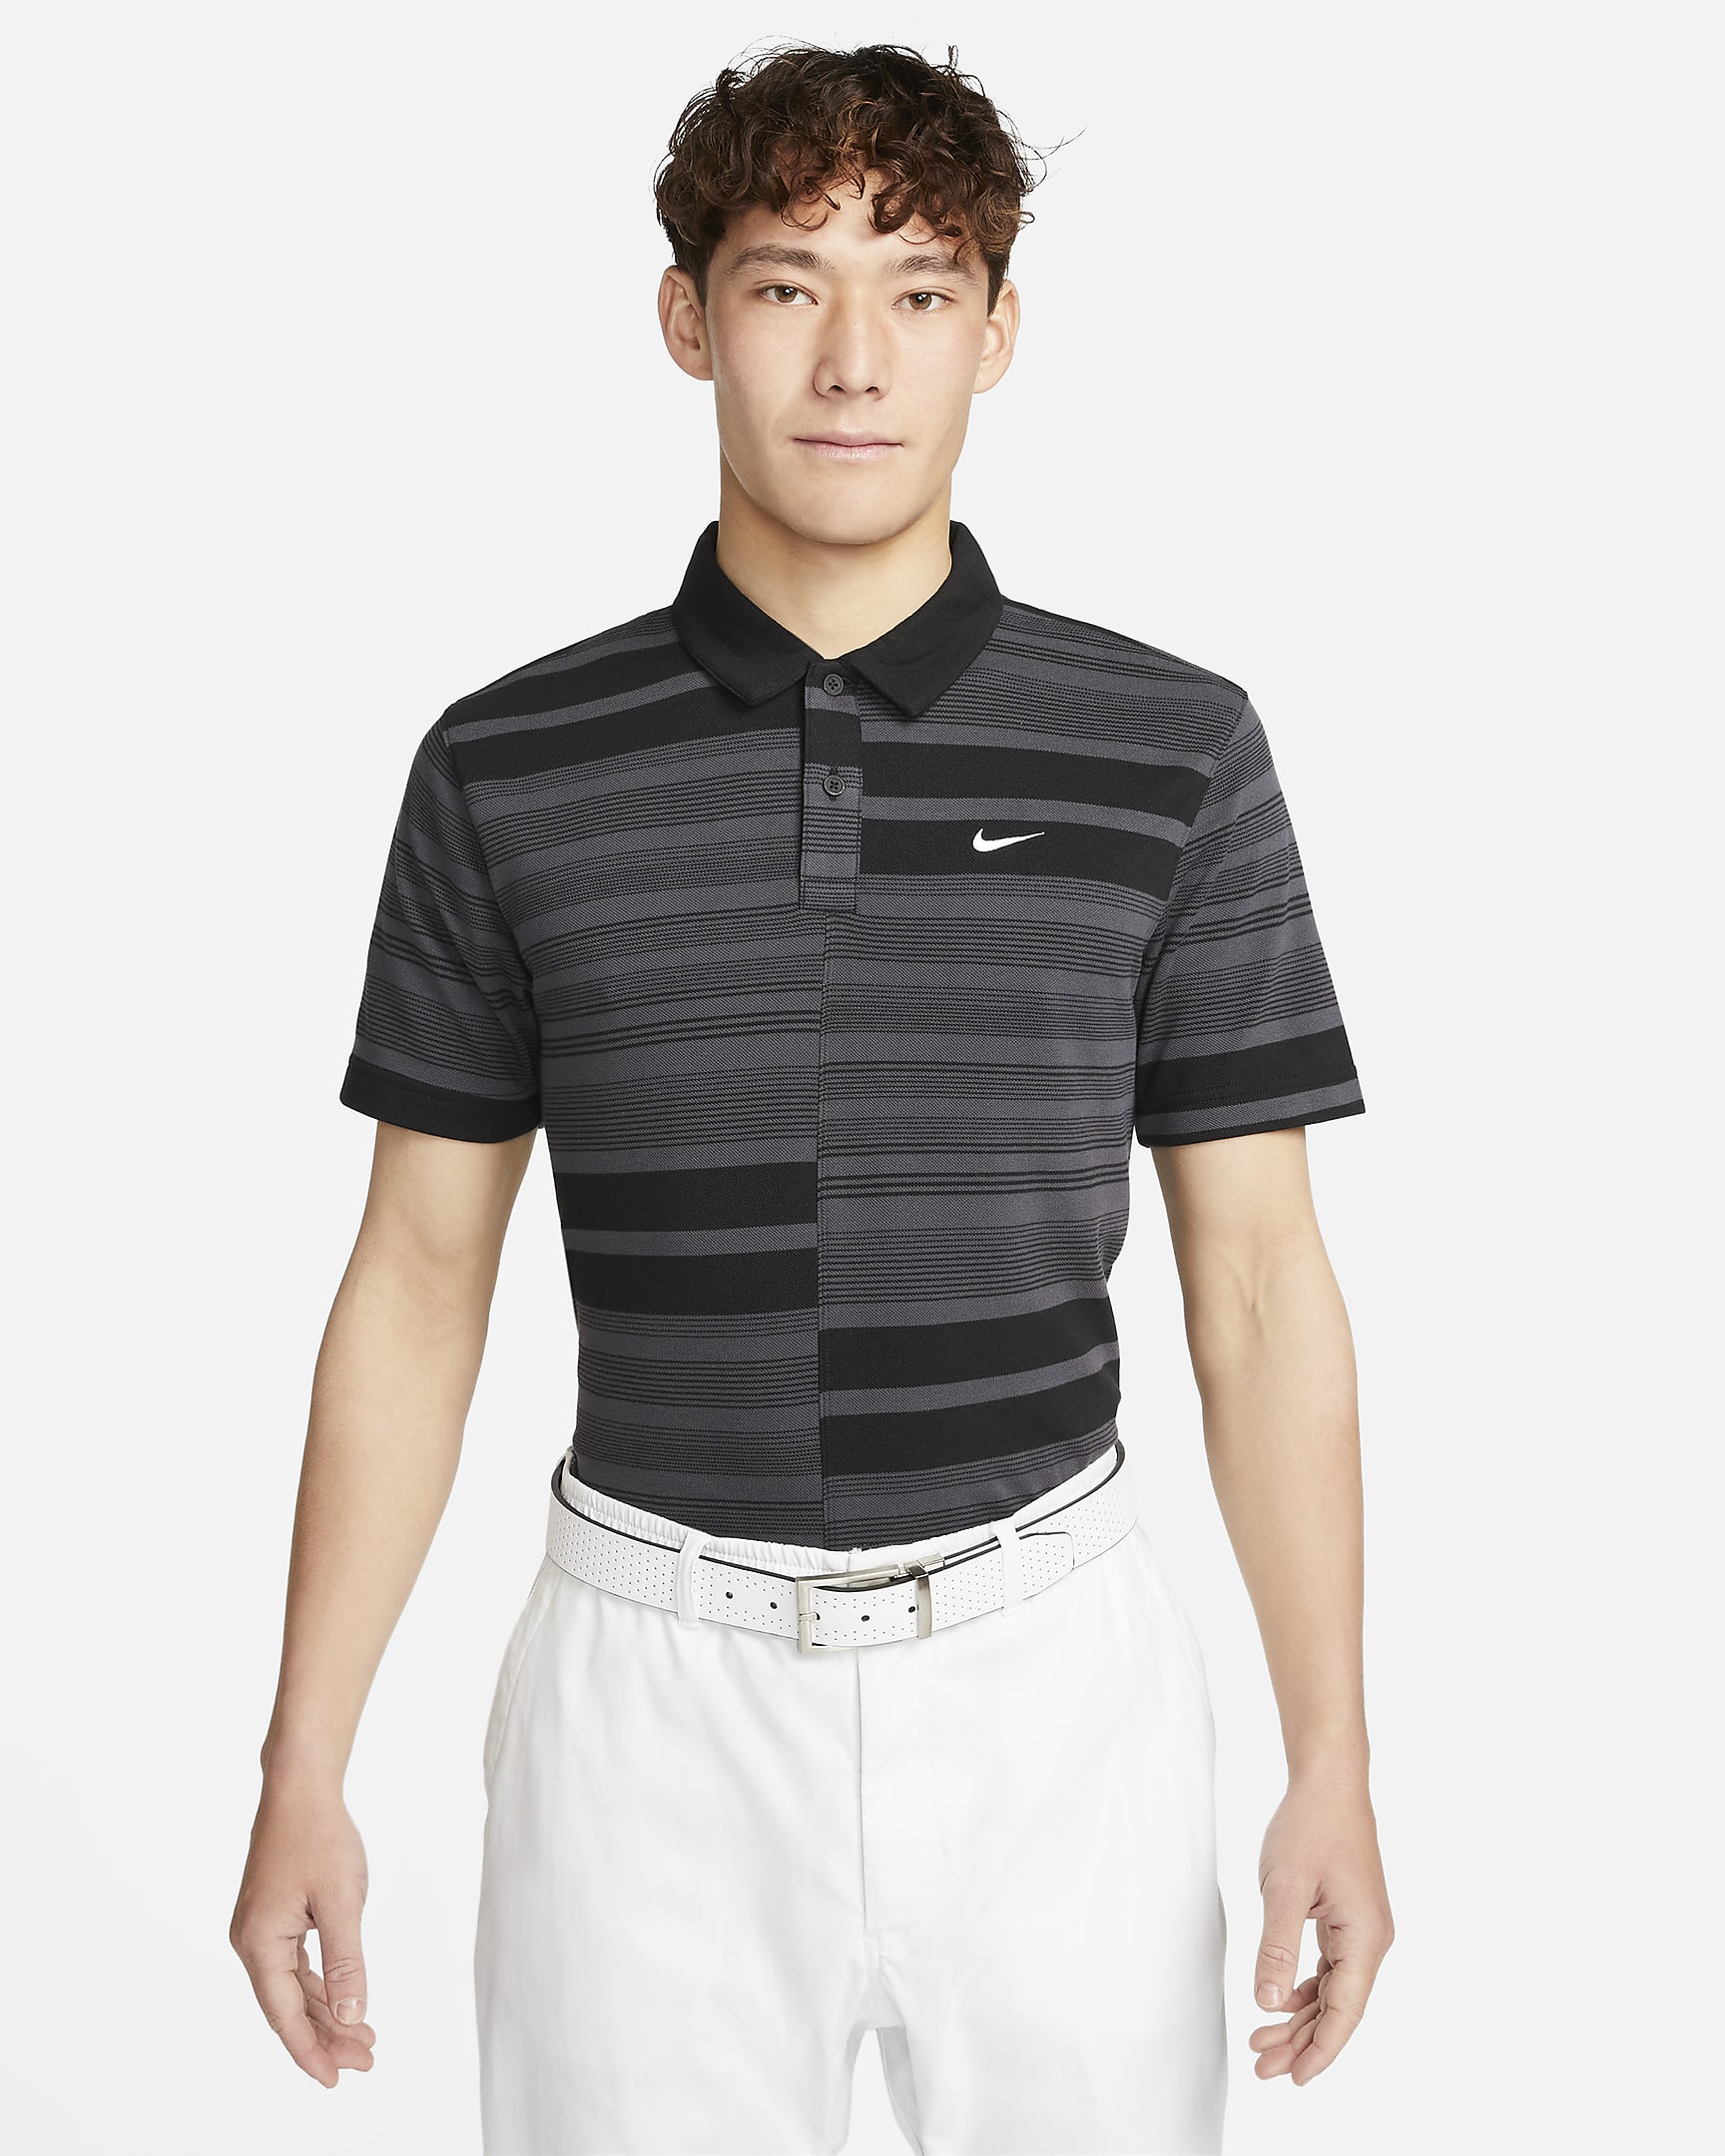 Nike Dri-FIT Unscripted Men's Golf Polo. Nike MY